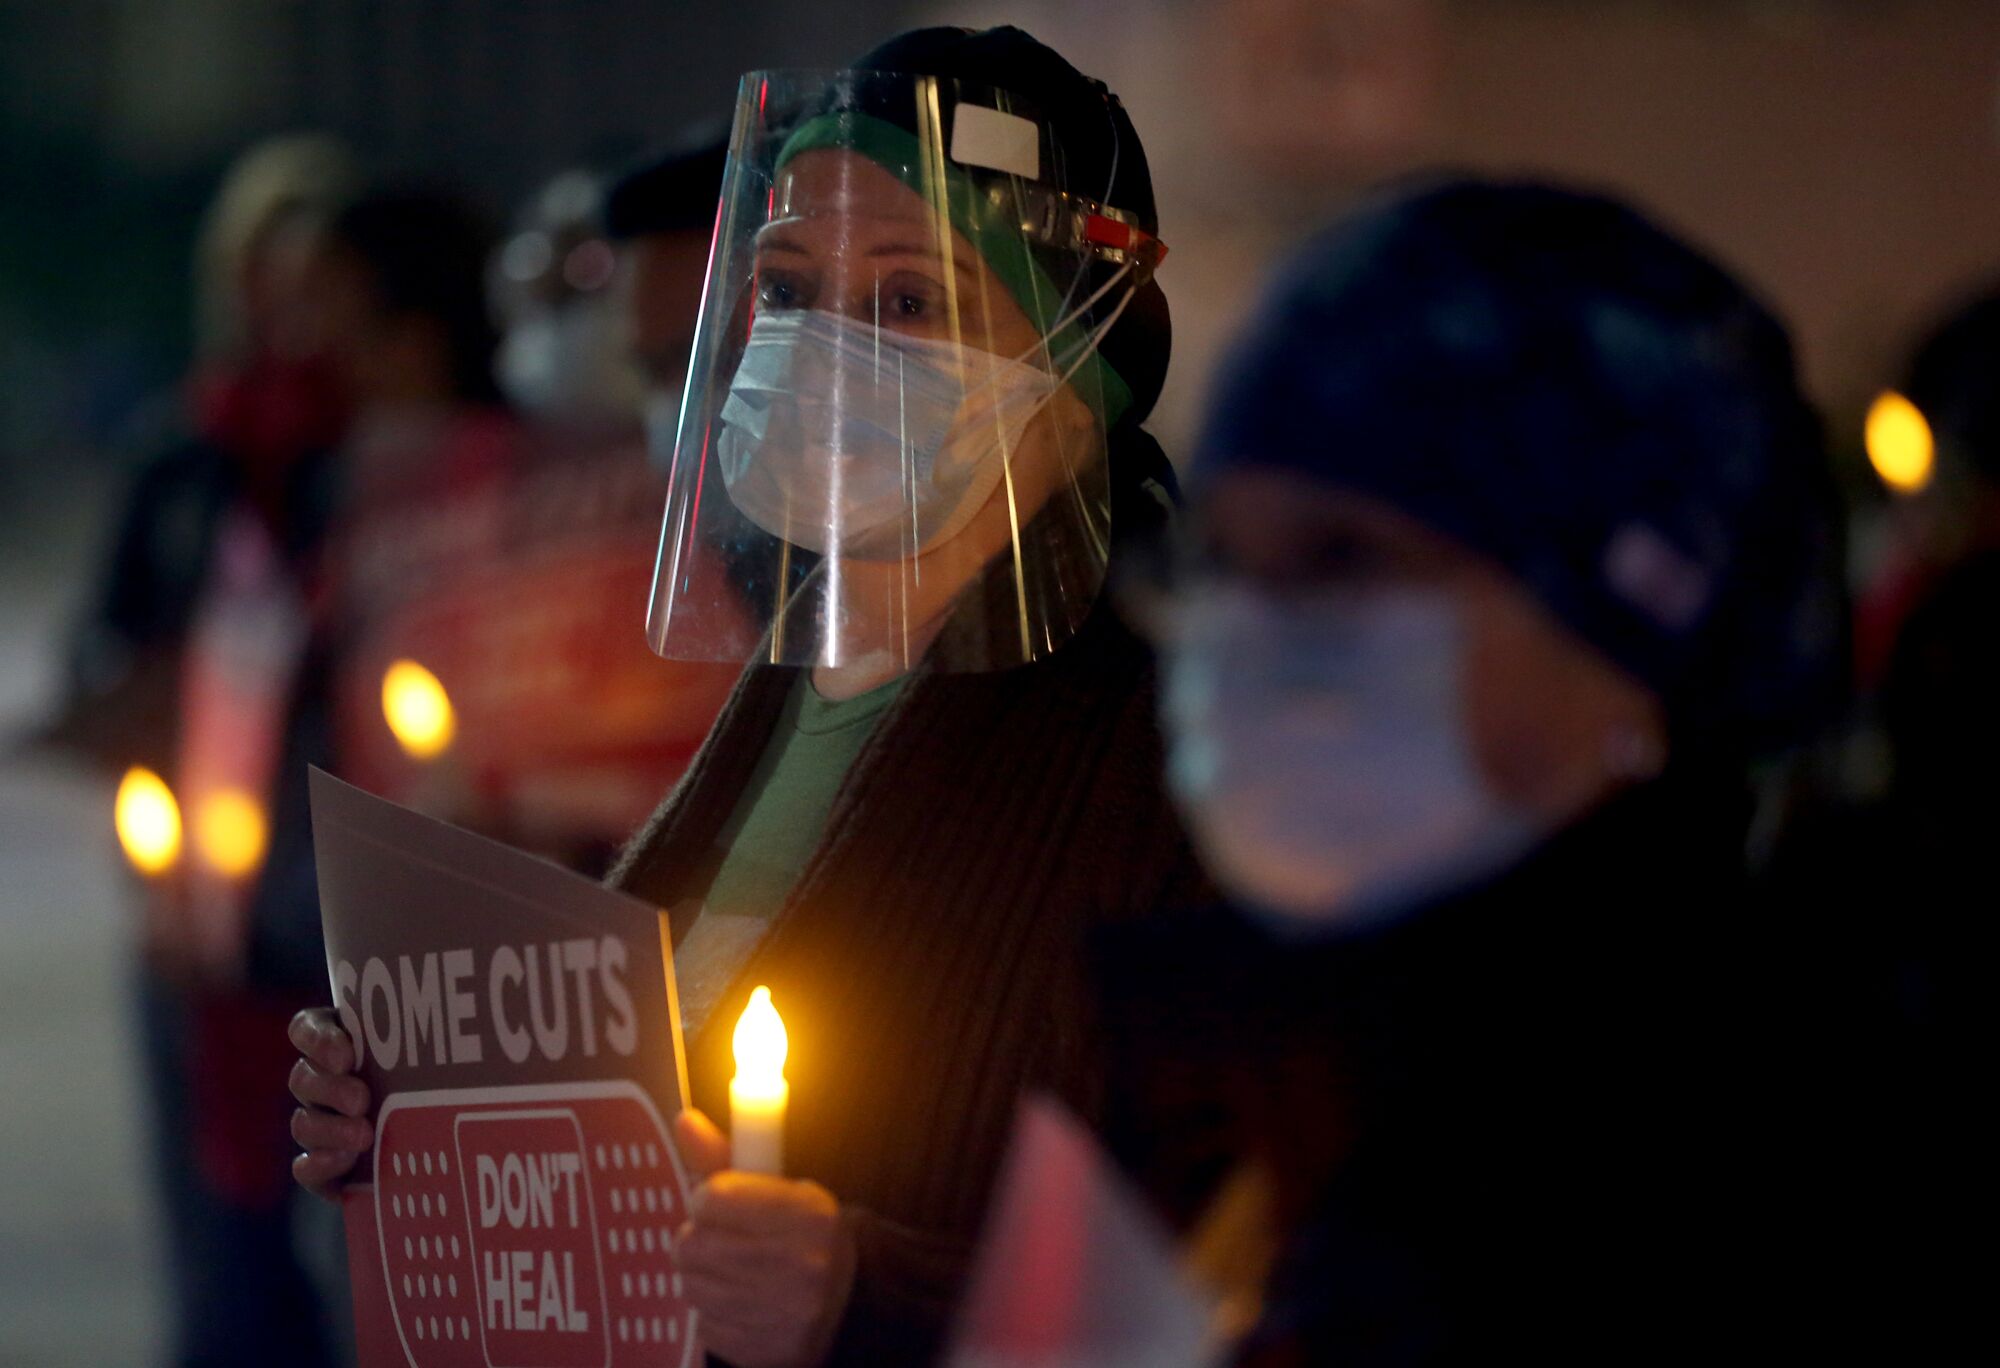 Nurses hold battery operated candles; one carries a sign that reads "Some cuts don't heal."